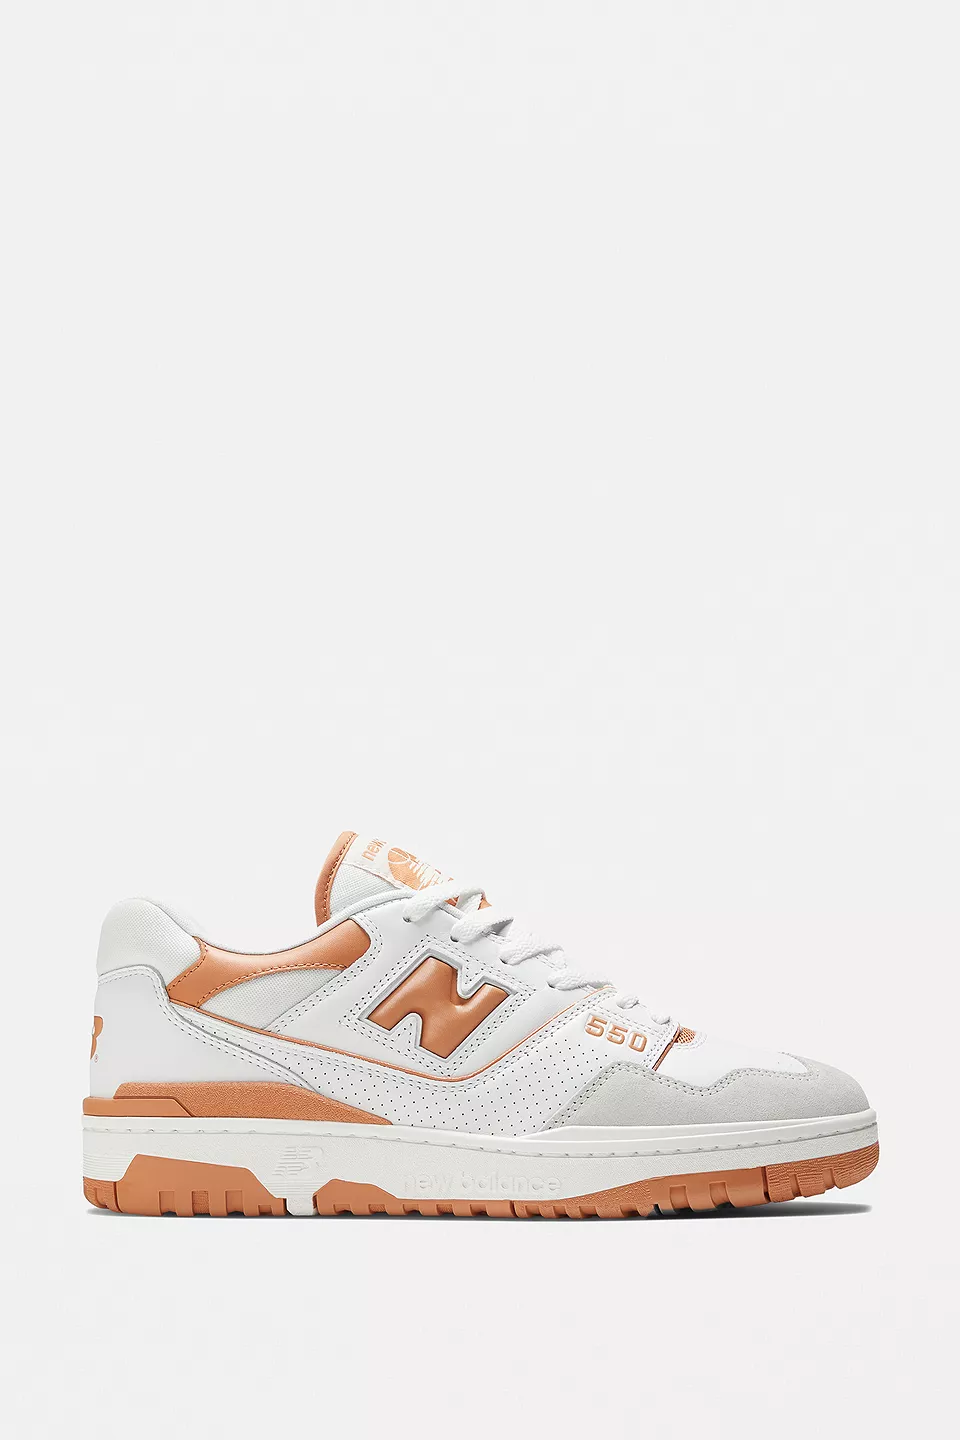 urbanoutfitters.com | New Balance 550 White & Tan Trainers